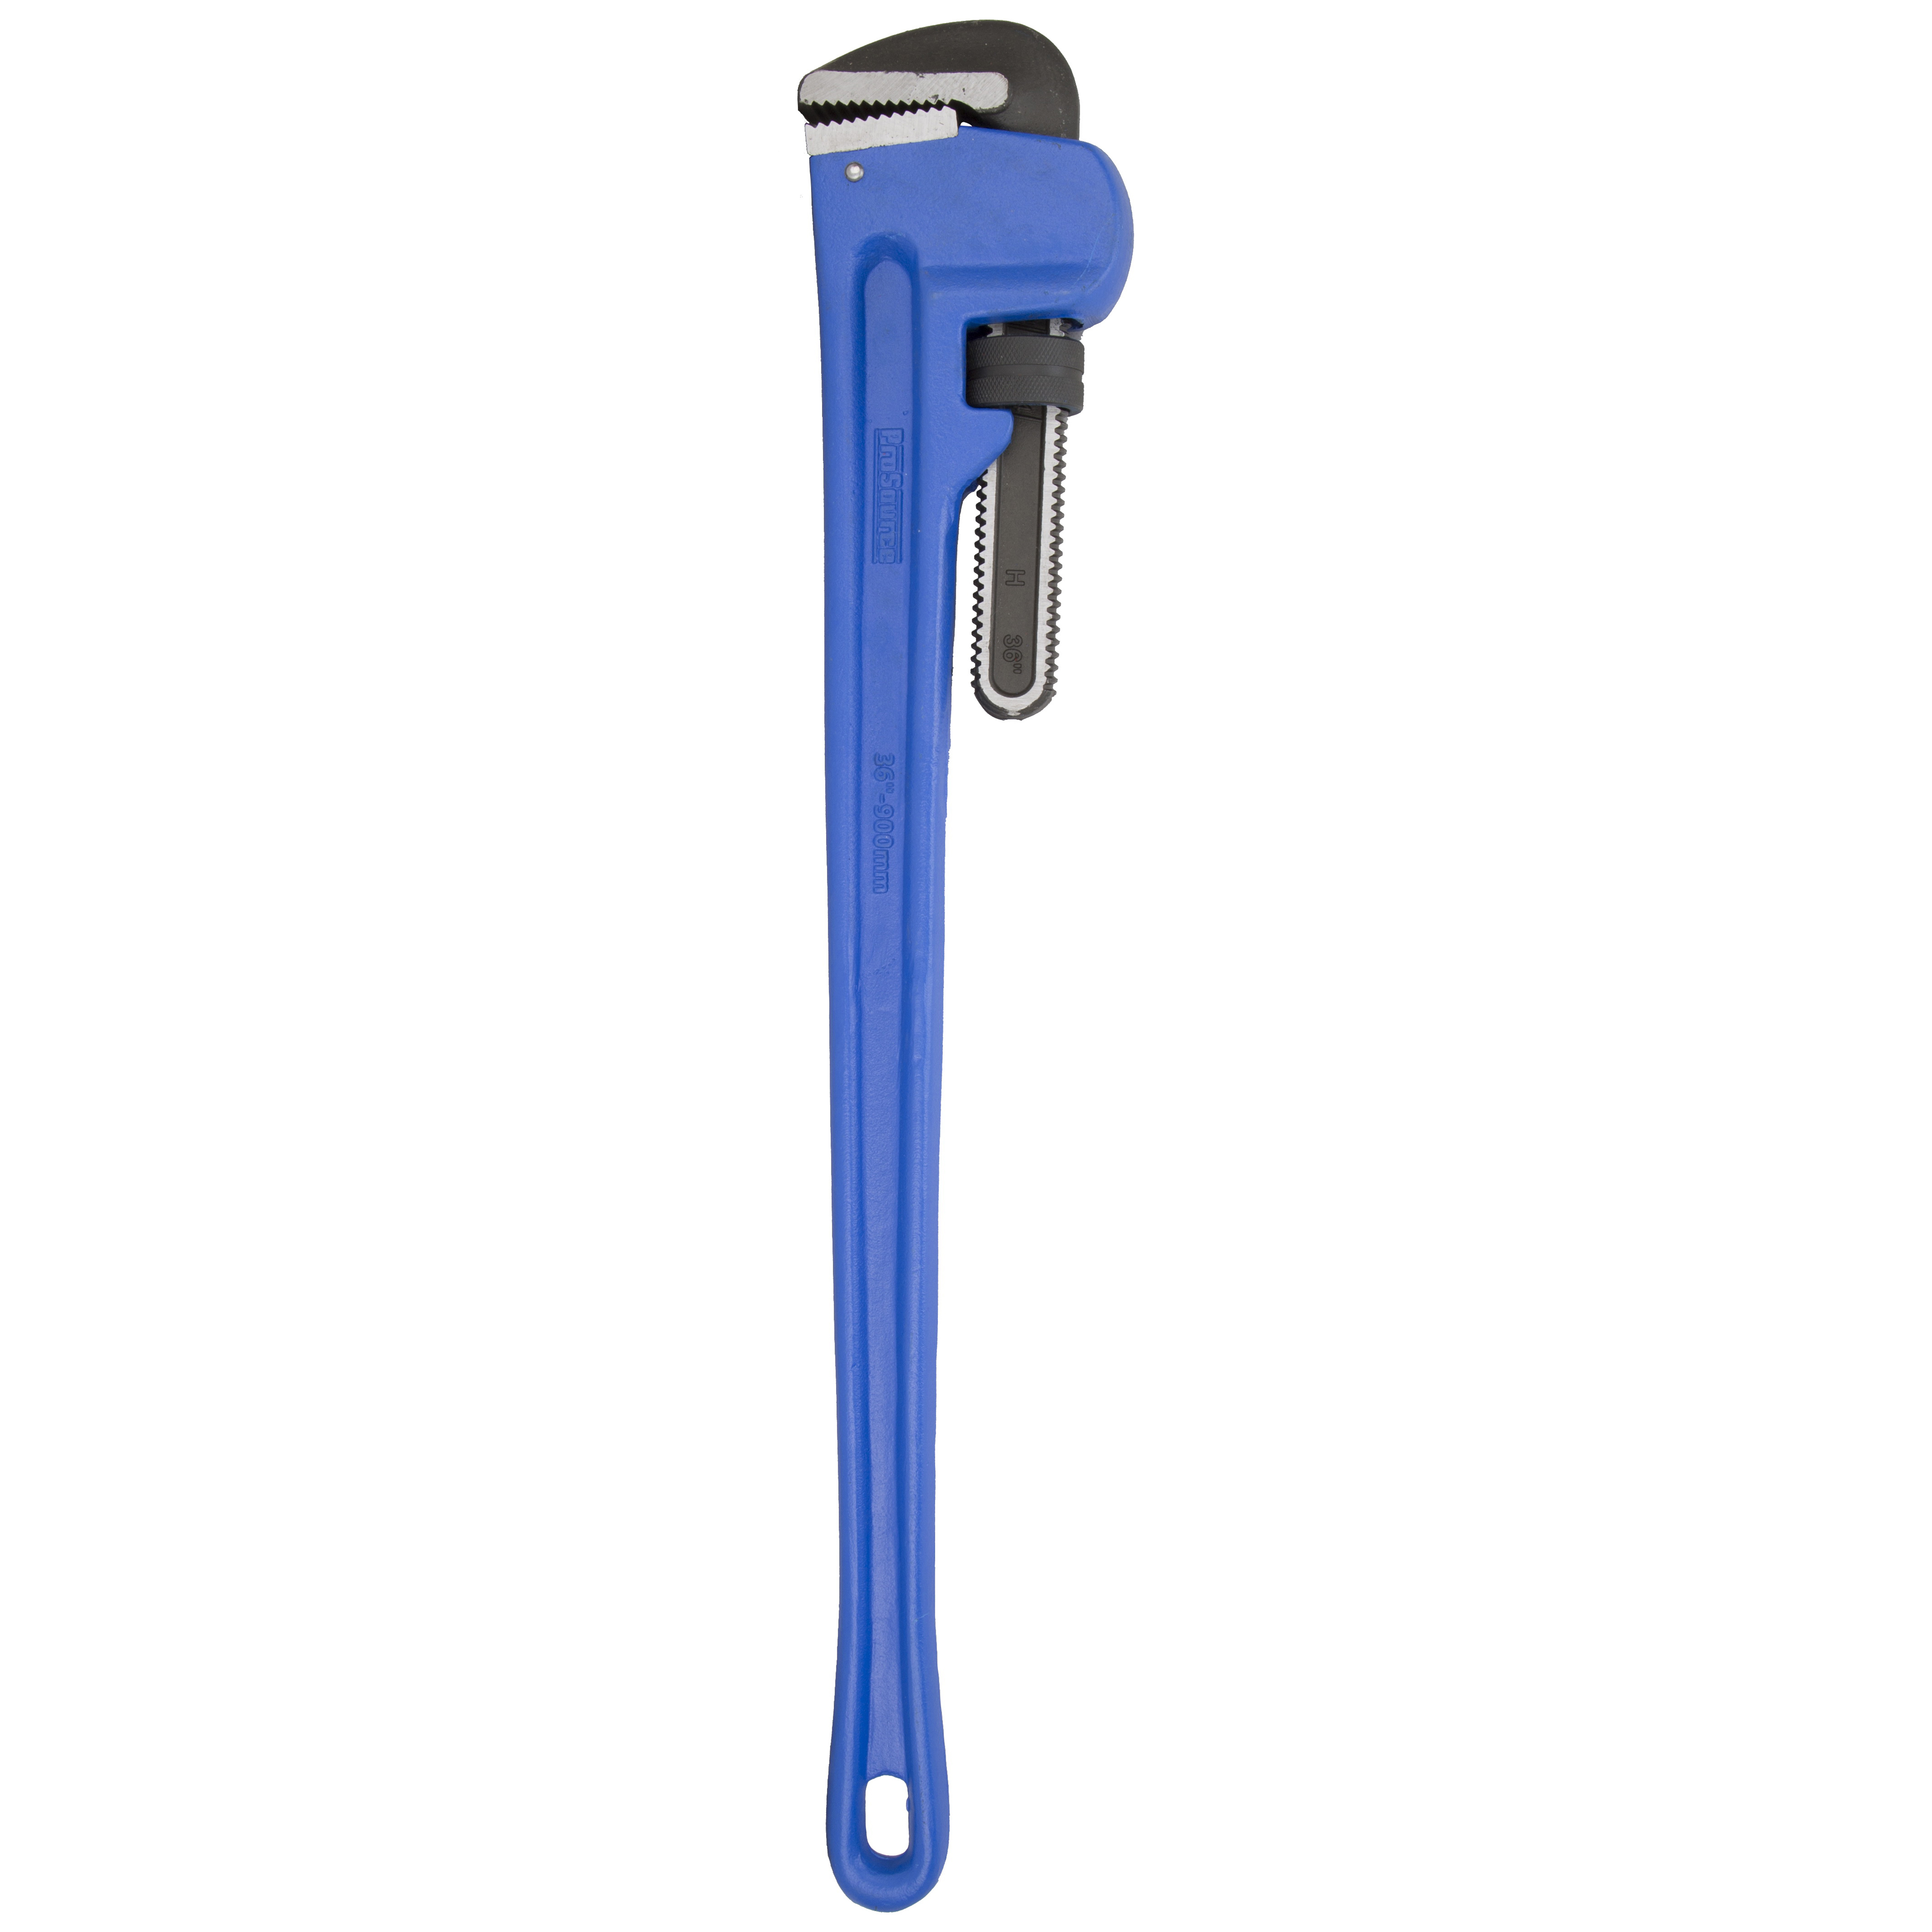 JL40136 Pipe Wrench, 130 mm Jaw, 36 in L, Serrated Jaw, Die-Cast Carbon Steel, Powder-Coated, Heavy-Duty Handle